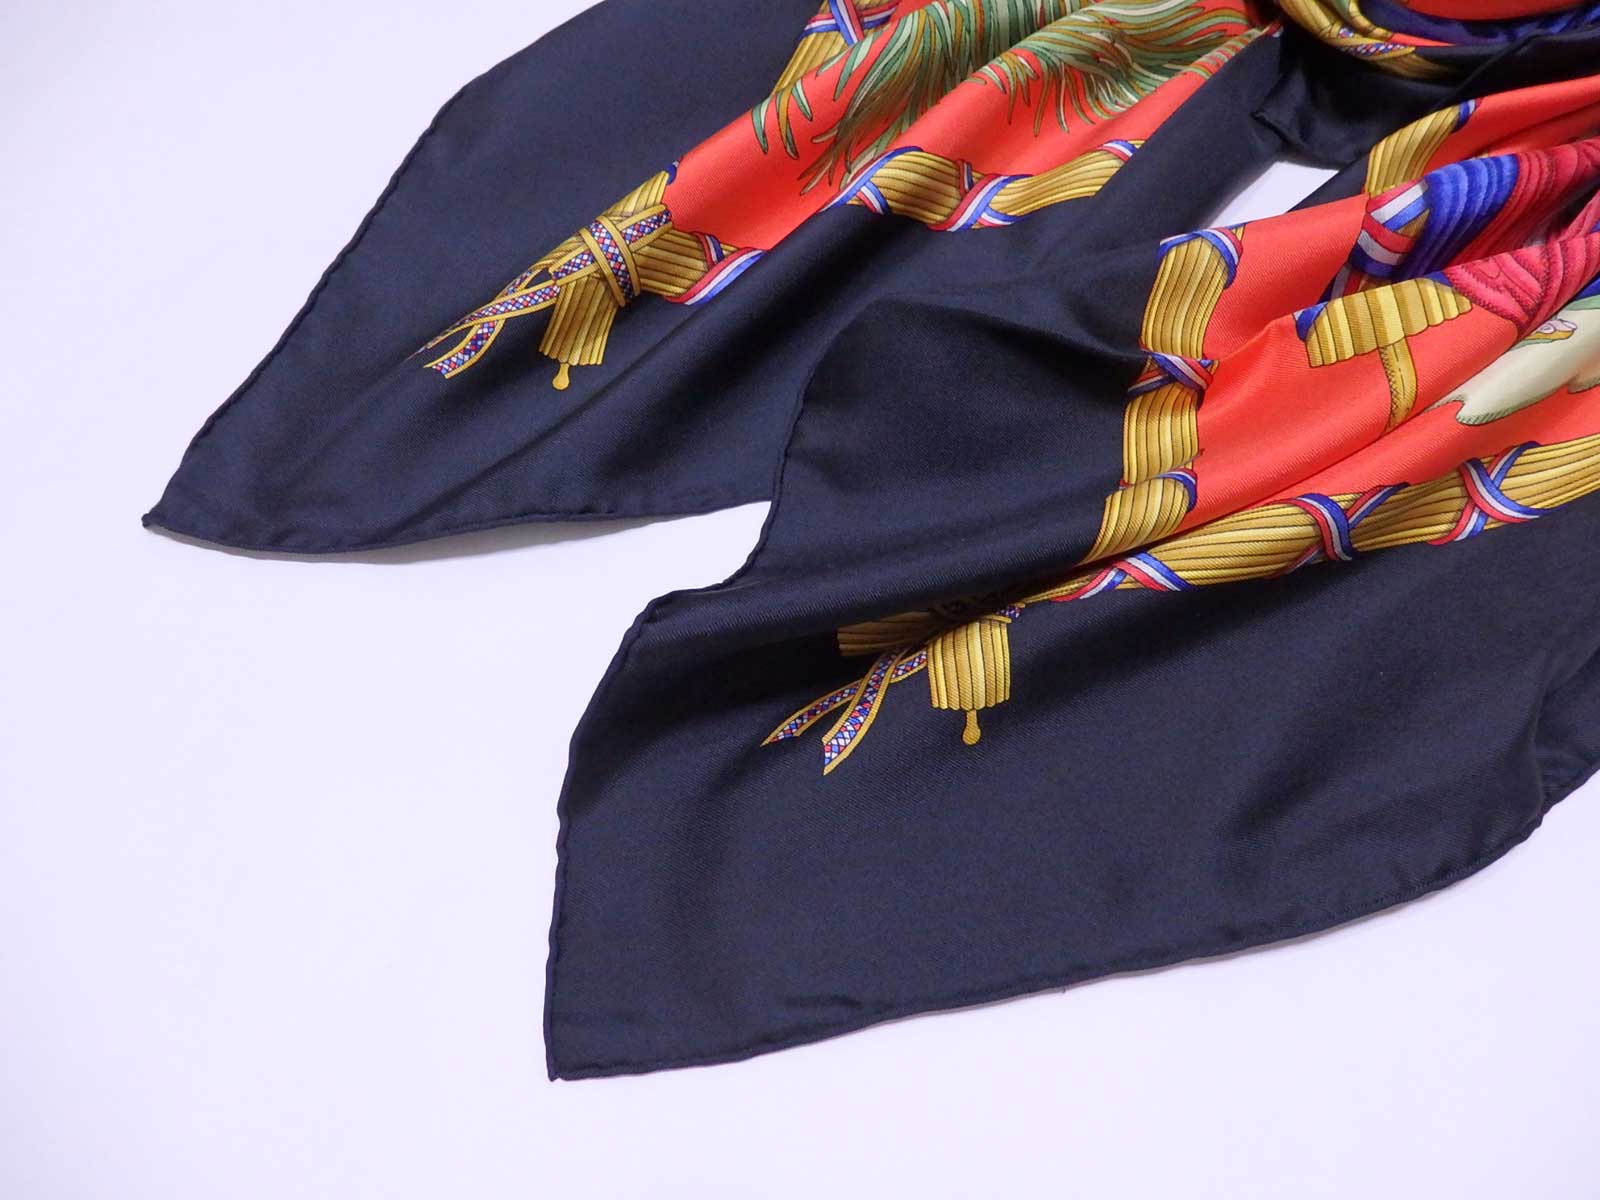 Auth HERMES Carre 90 Scarf Black/Red/Yellow/Blue 100% Silk - e33033 | eBay